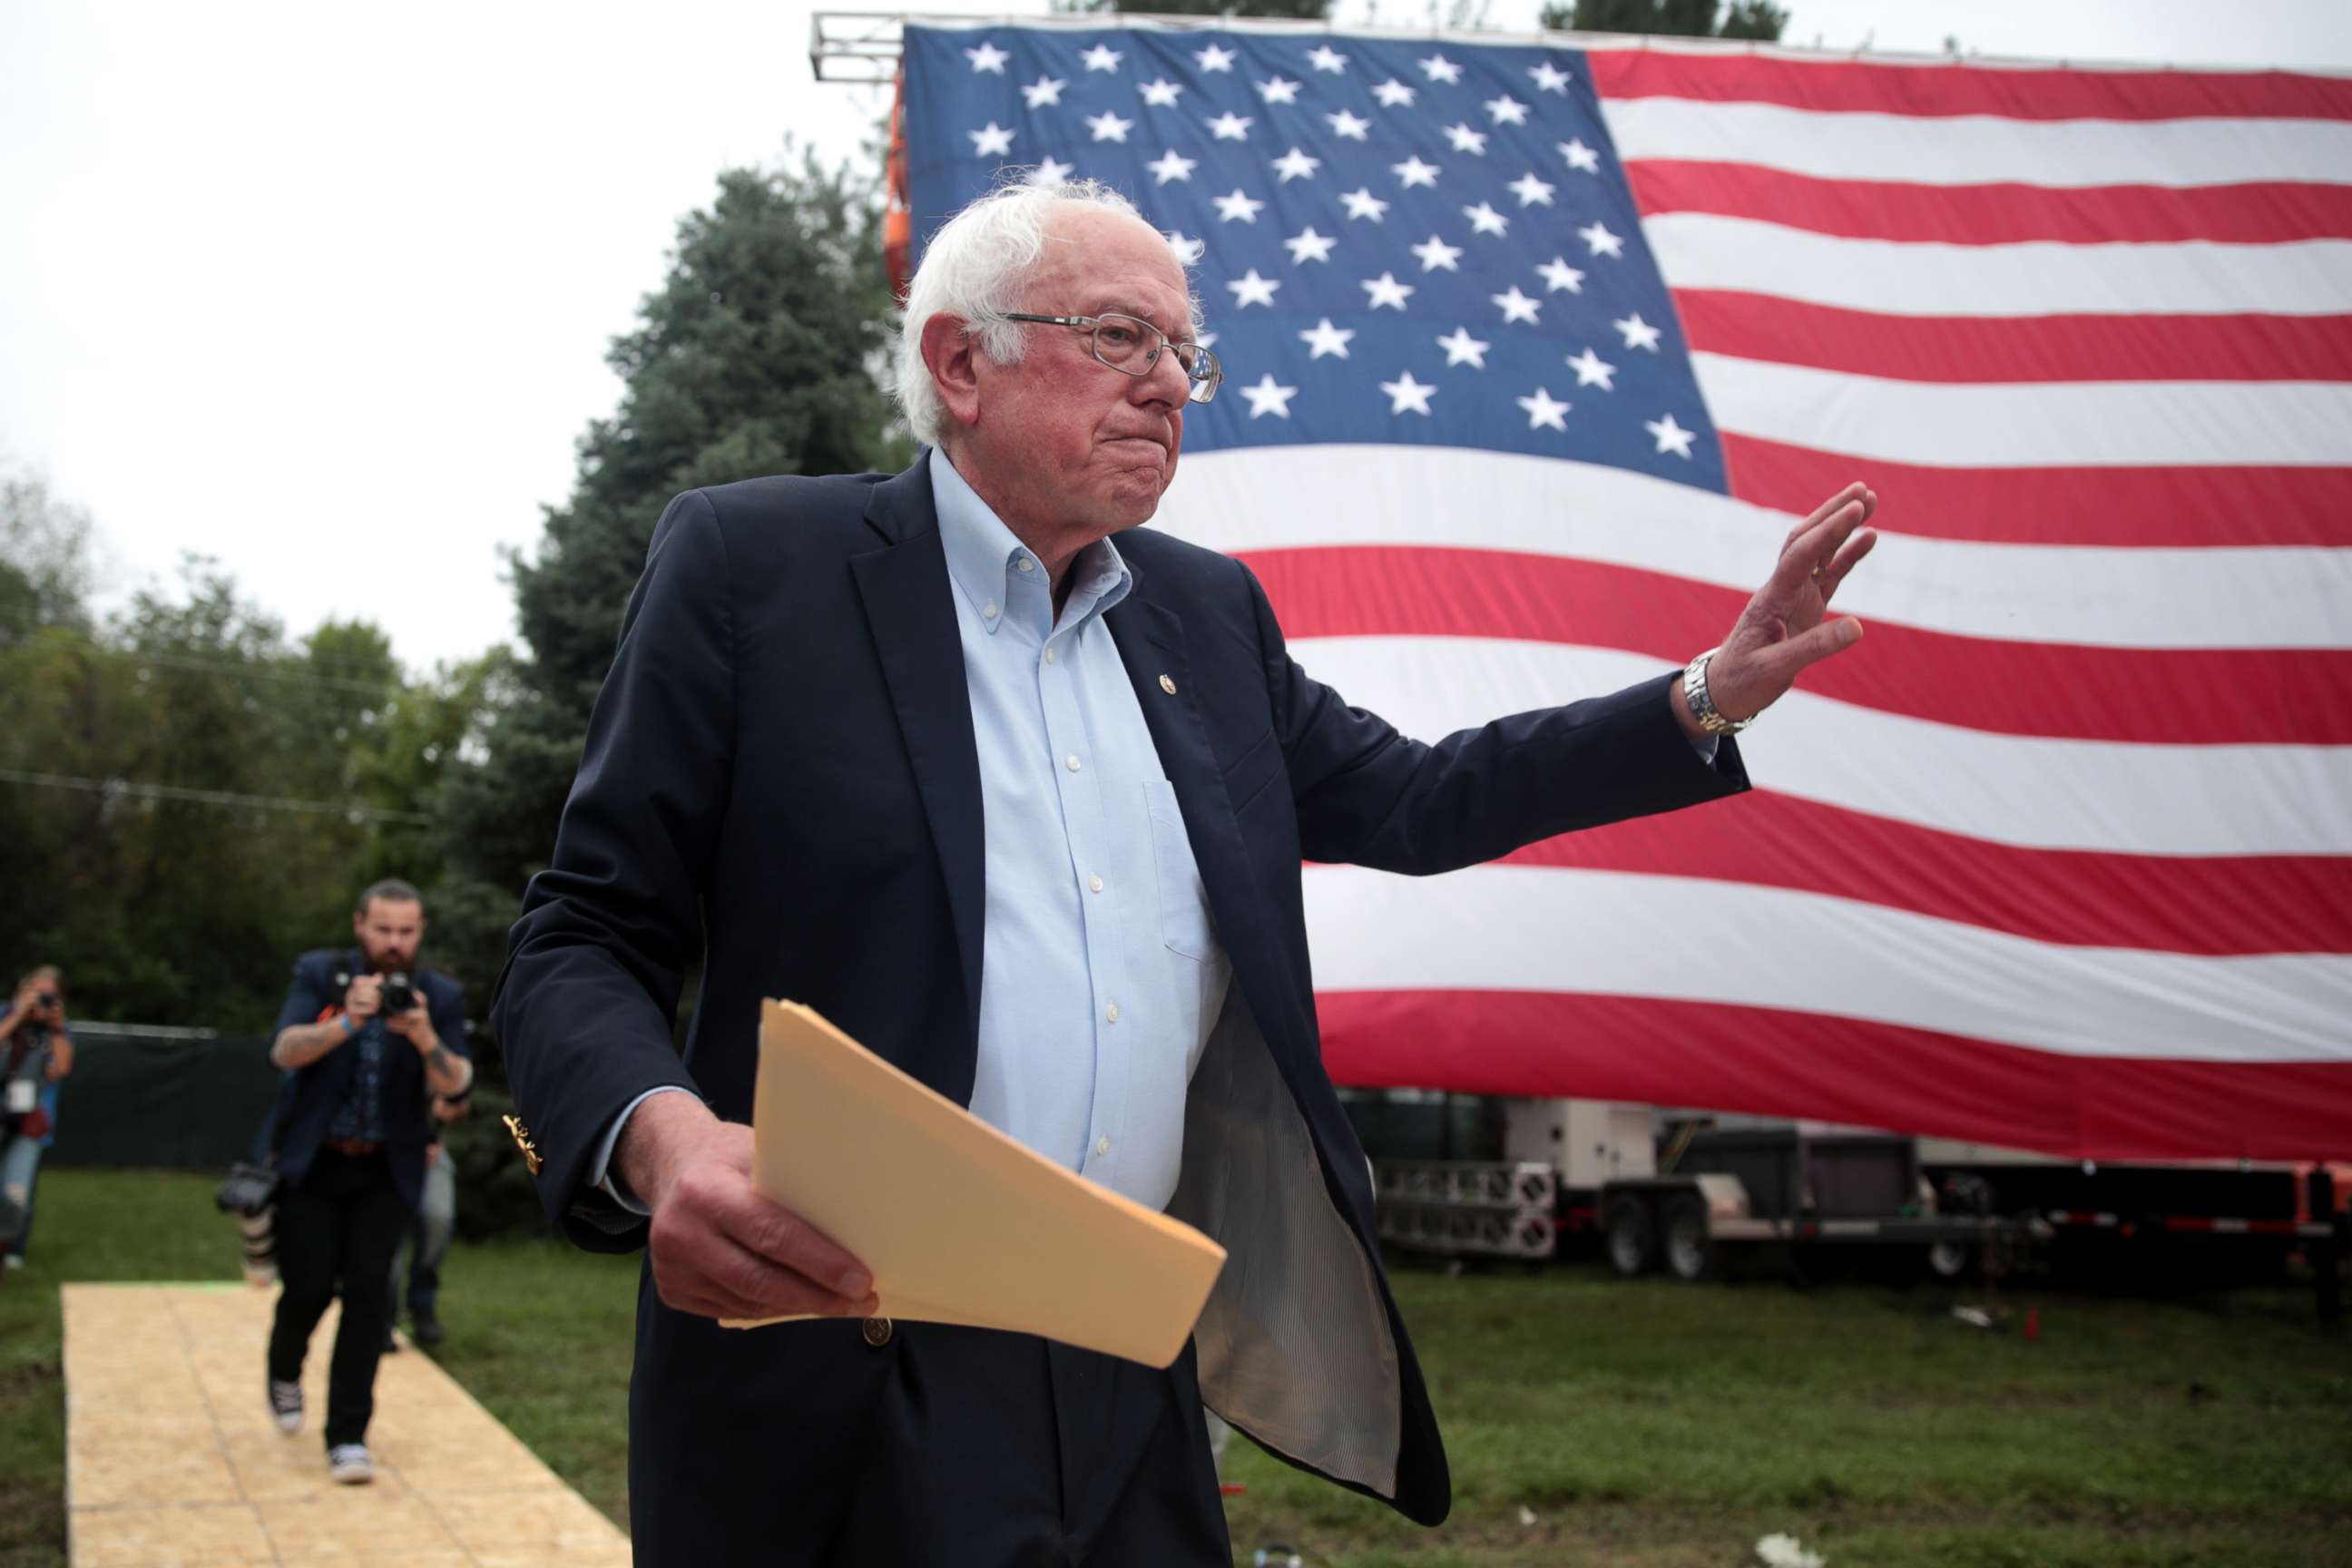 PHOTO: Democratic presidential candidate, Sen. Bernie Sanders greets guests at the Polk County Democrats' Steak Fry on Sept. 21, 2019, in Des Moines, Iowa.